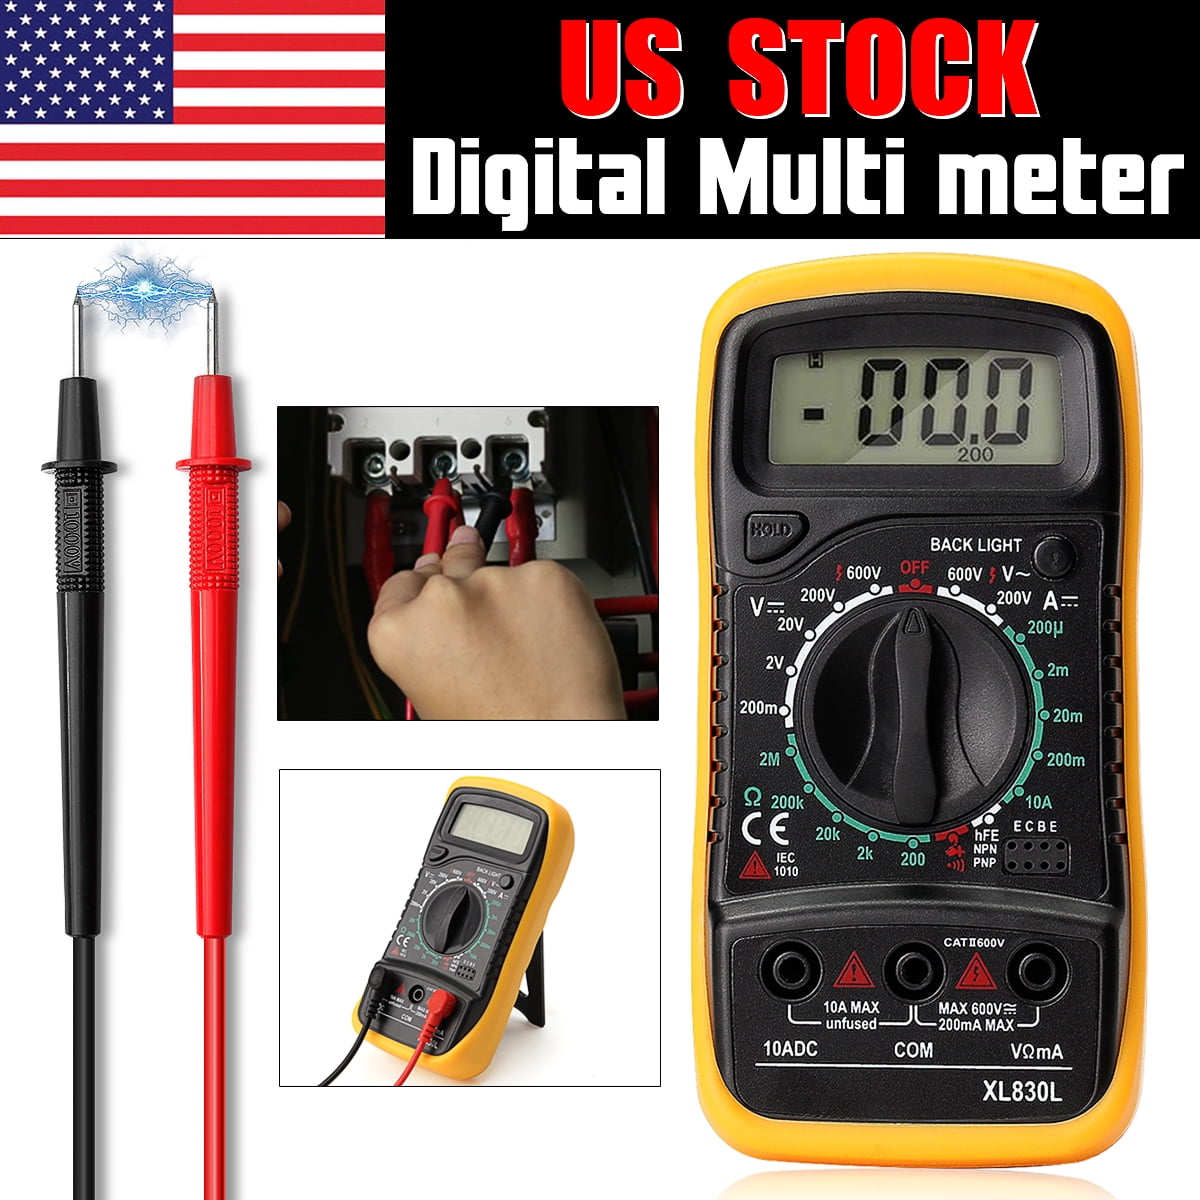 Digital Multimeters Electronic Voltage Meter Multimeter with Continuity Test